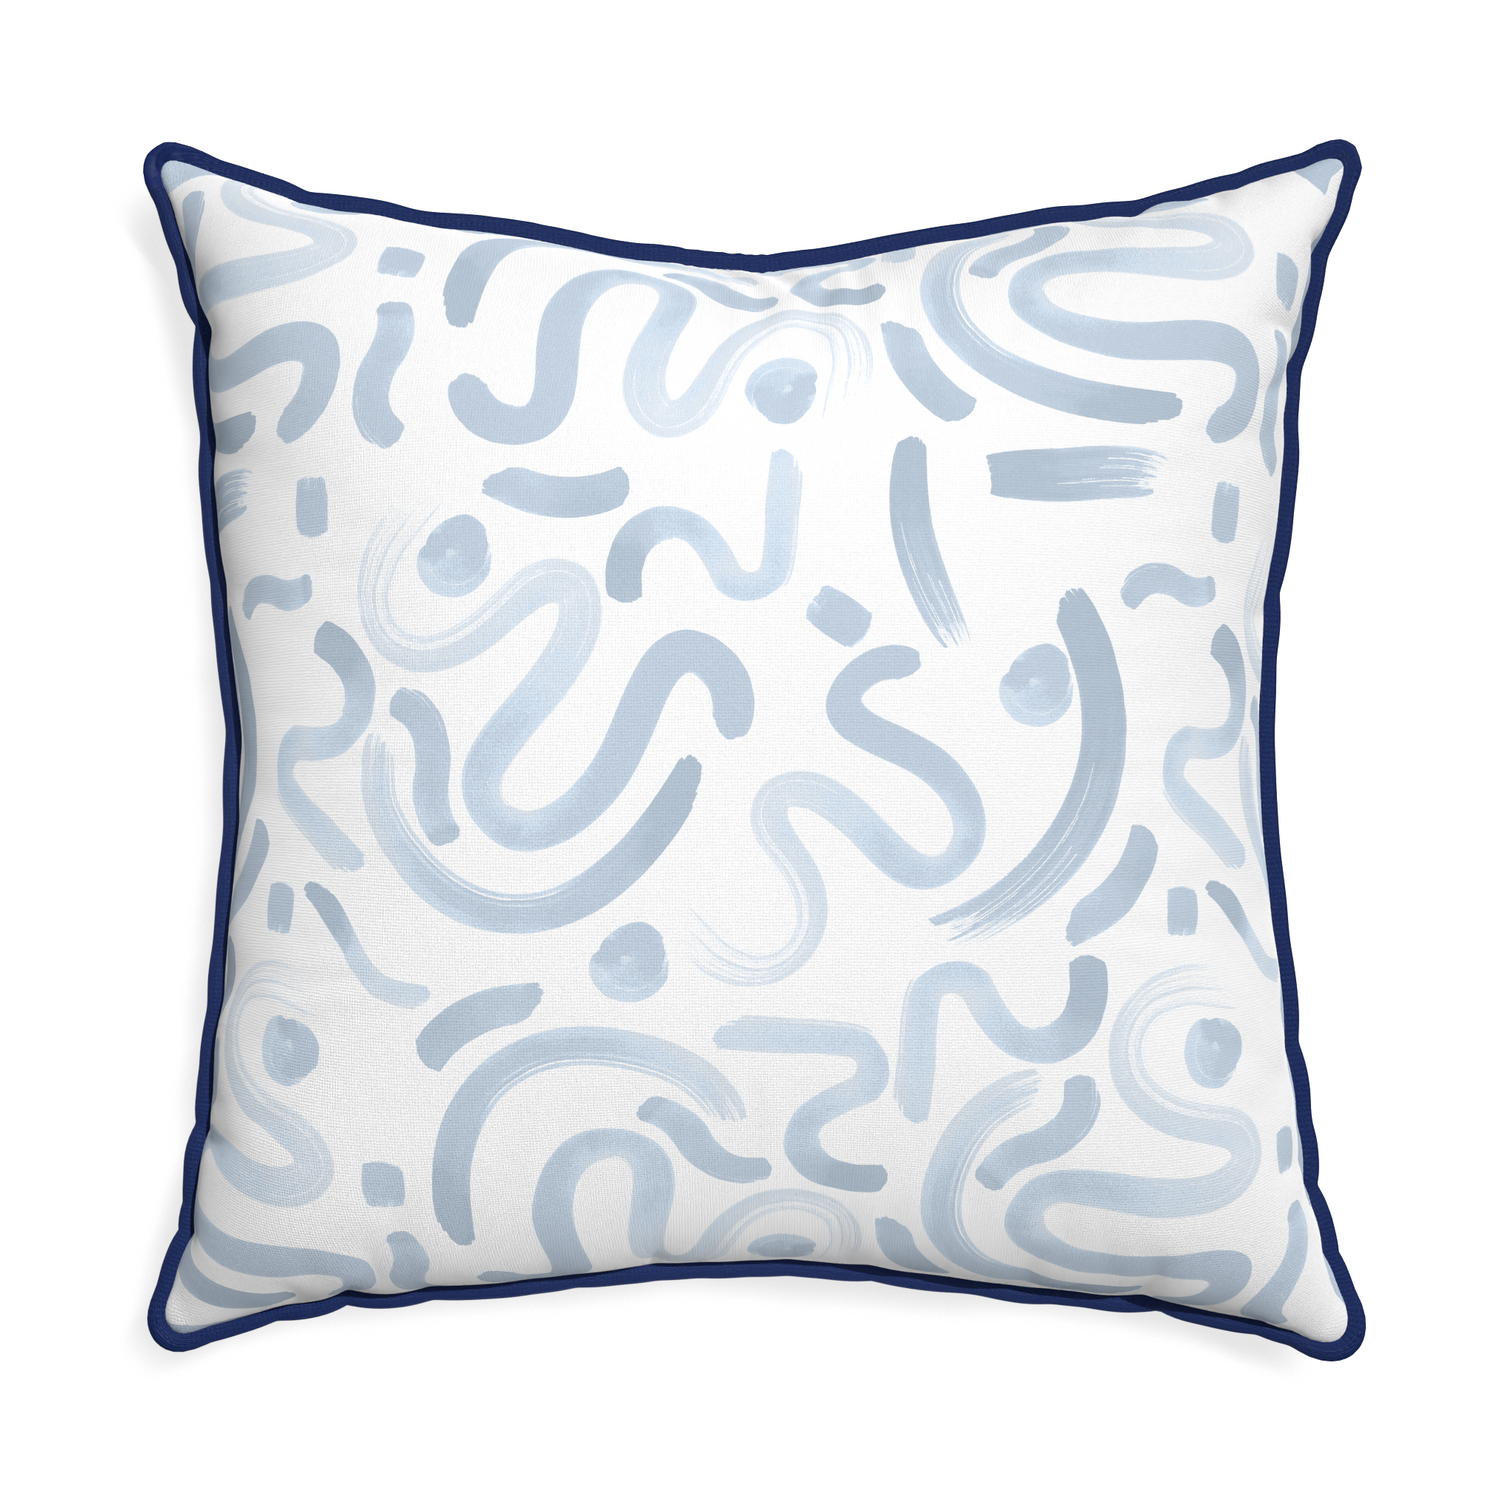 Euro-sham hockney sky custom pillow with midnight piping on white background